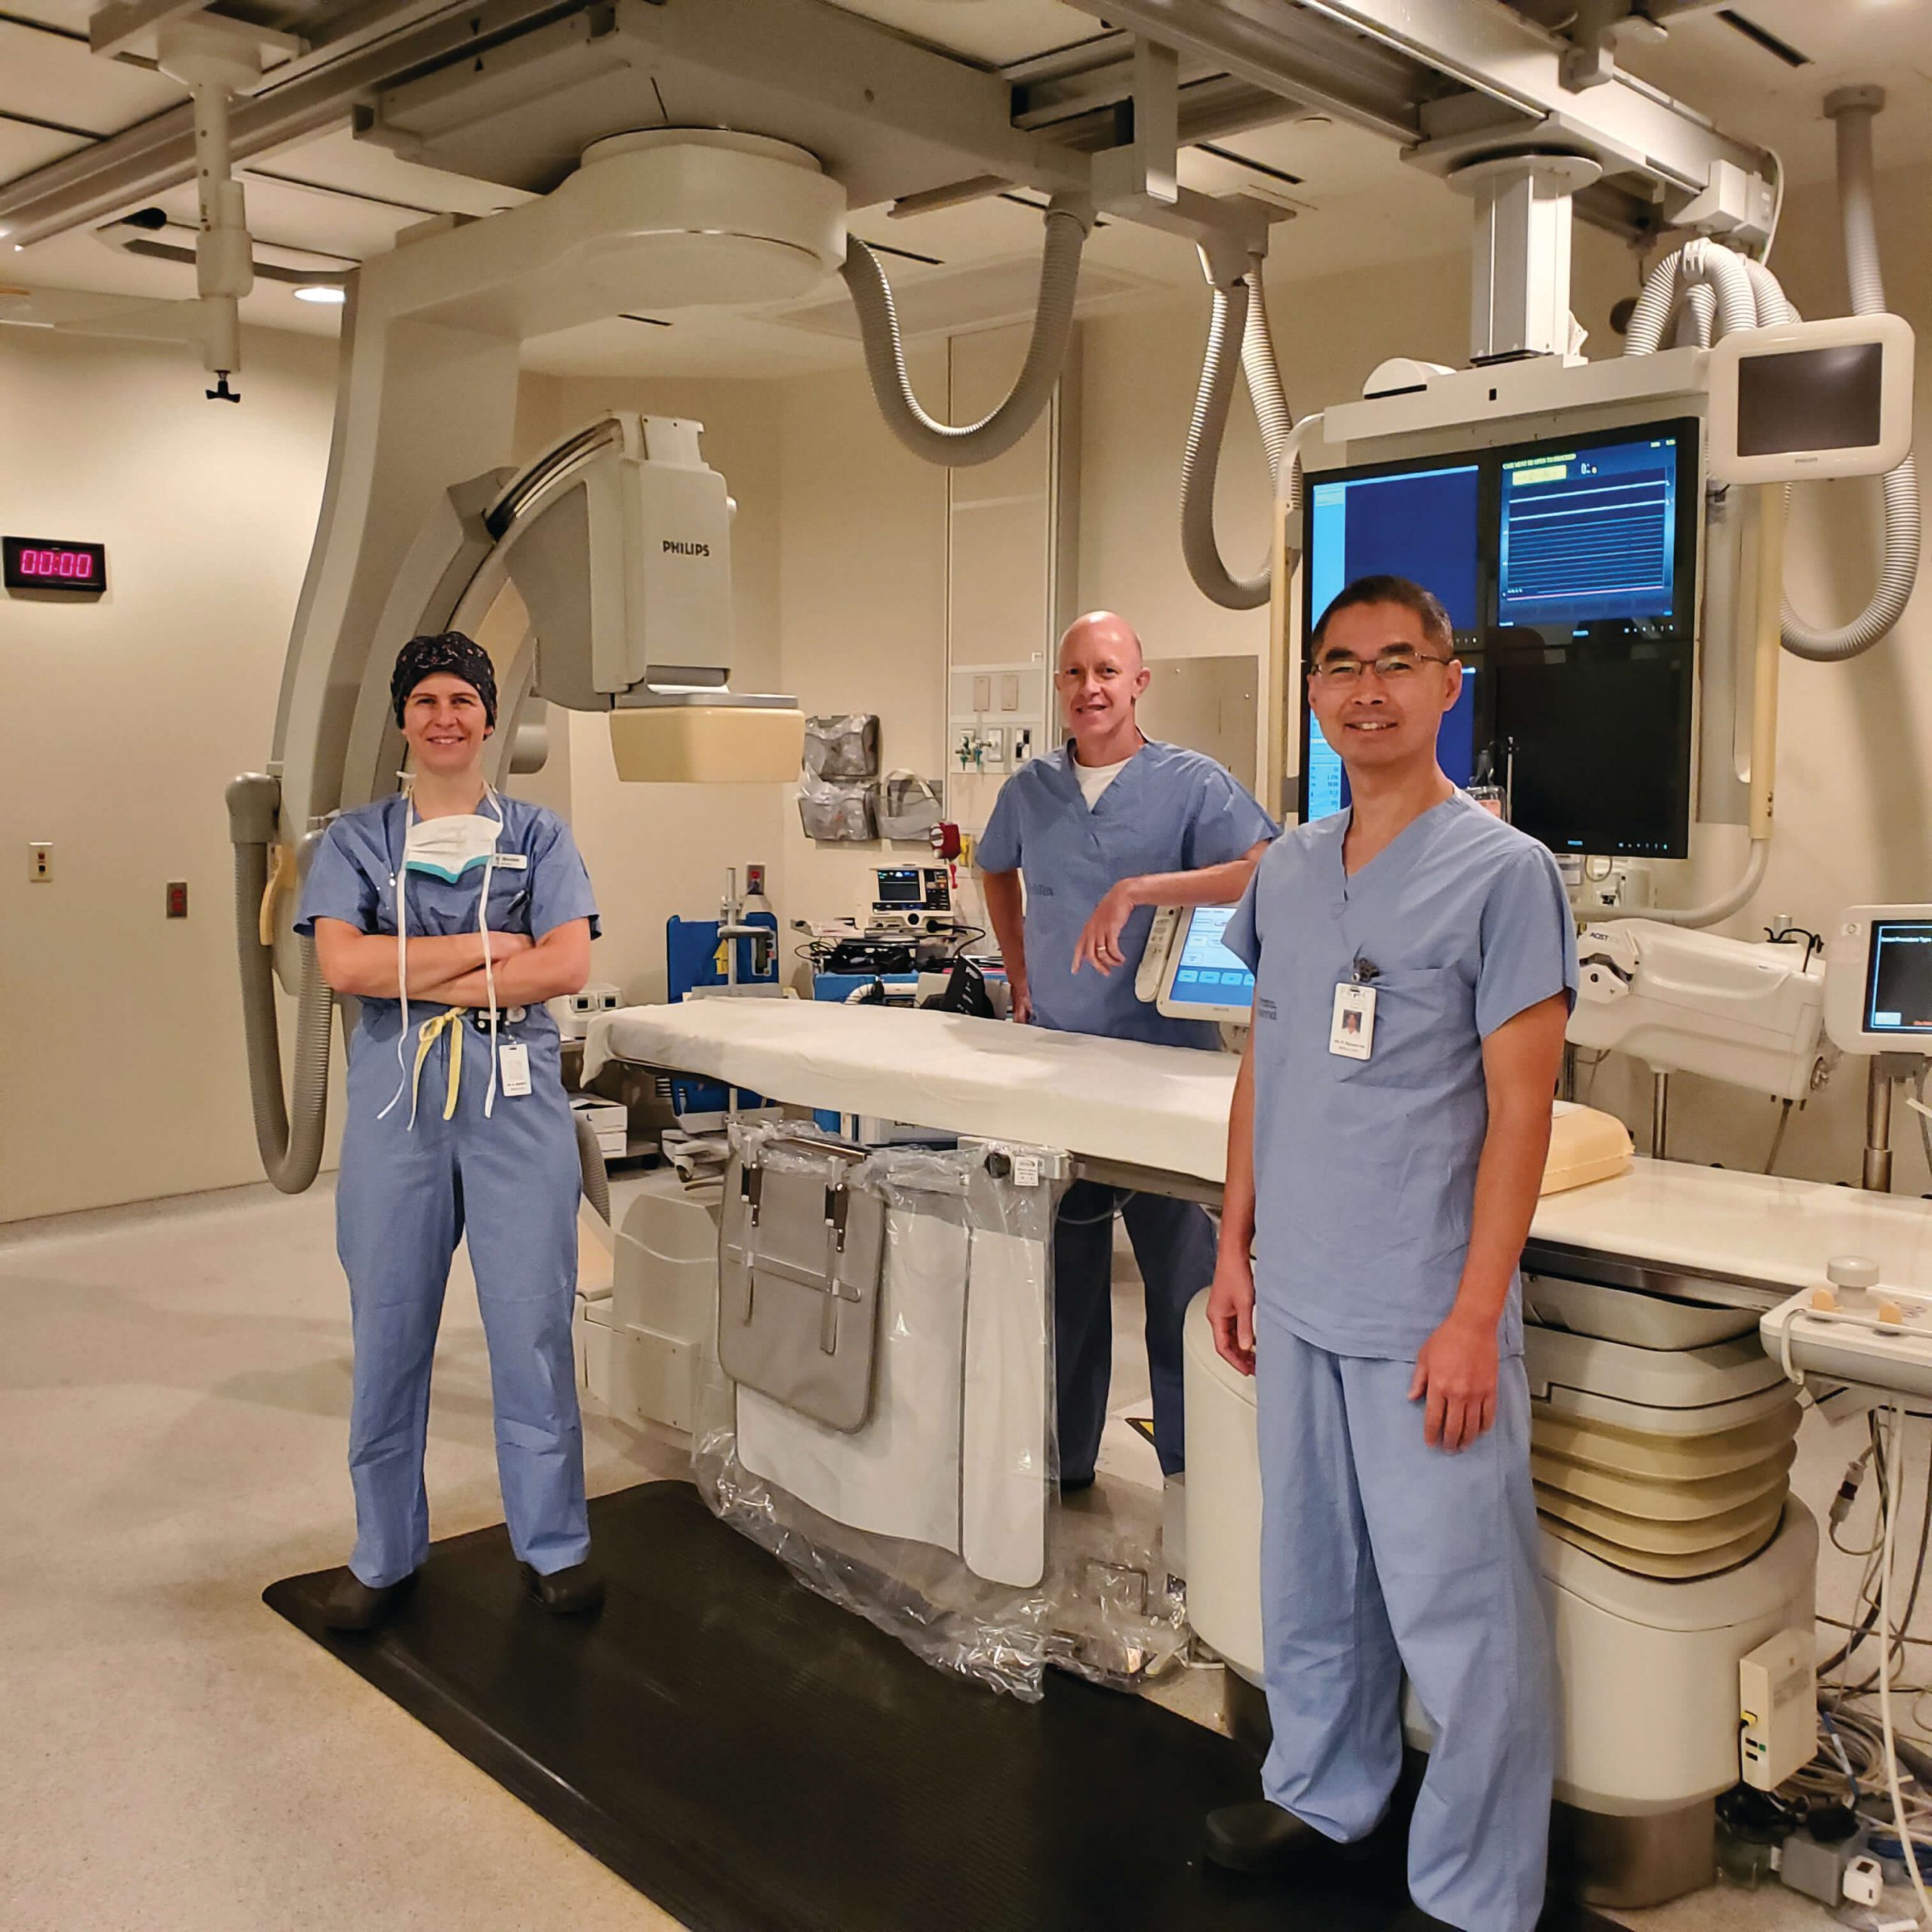 PRHC's Interventional Cardiologists pose in the Cardiac Cath Lab